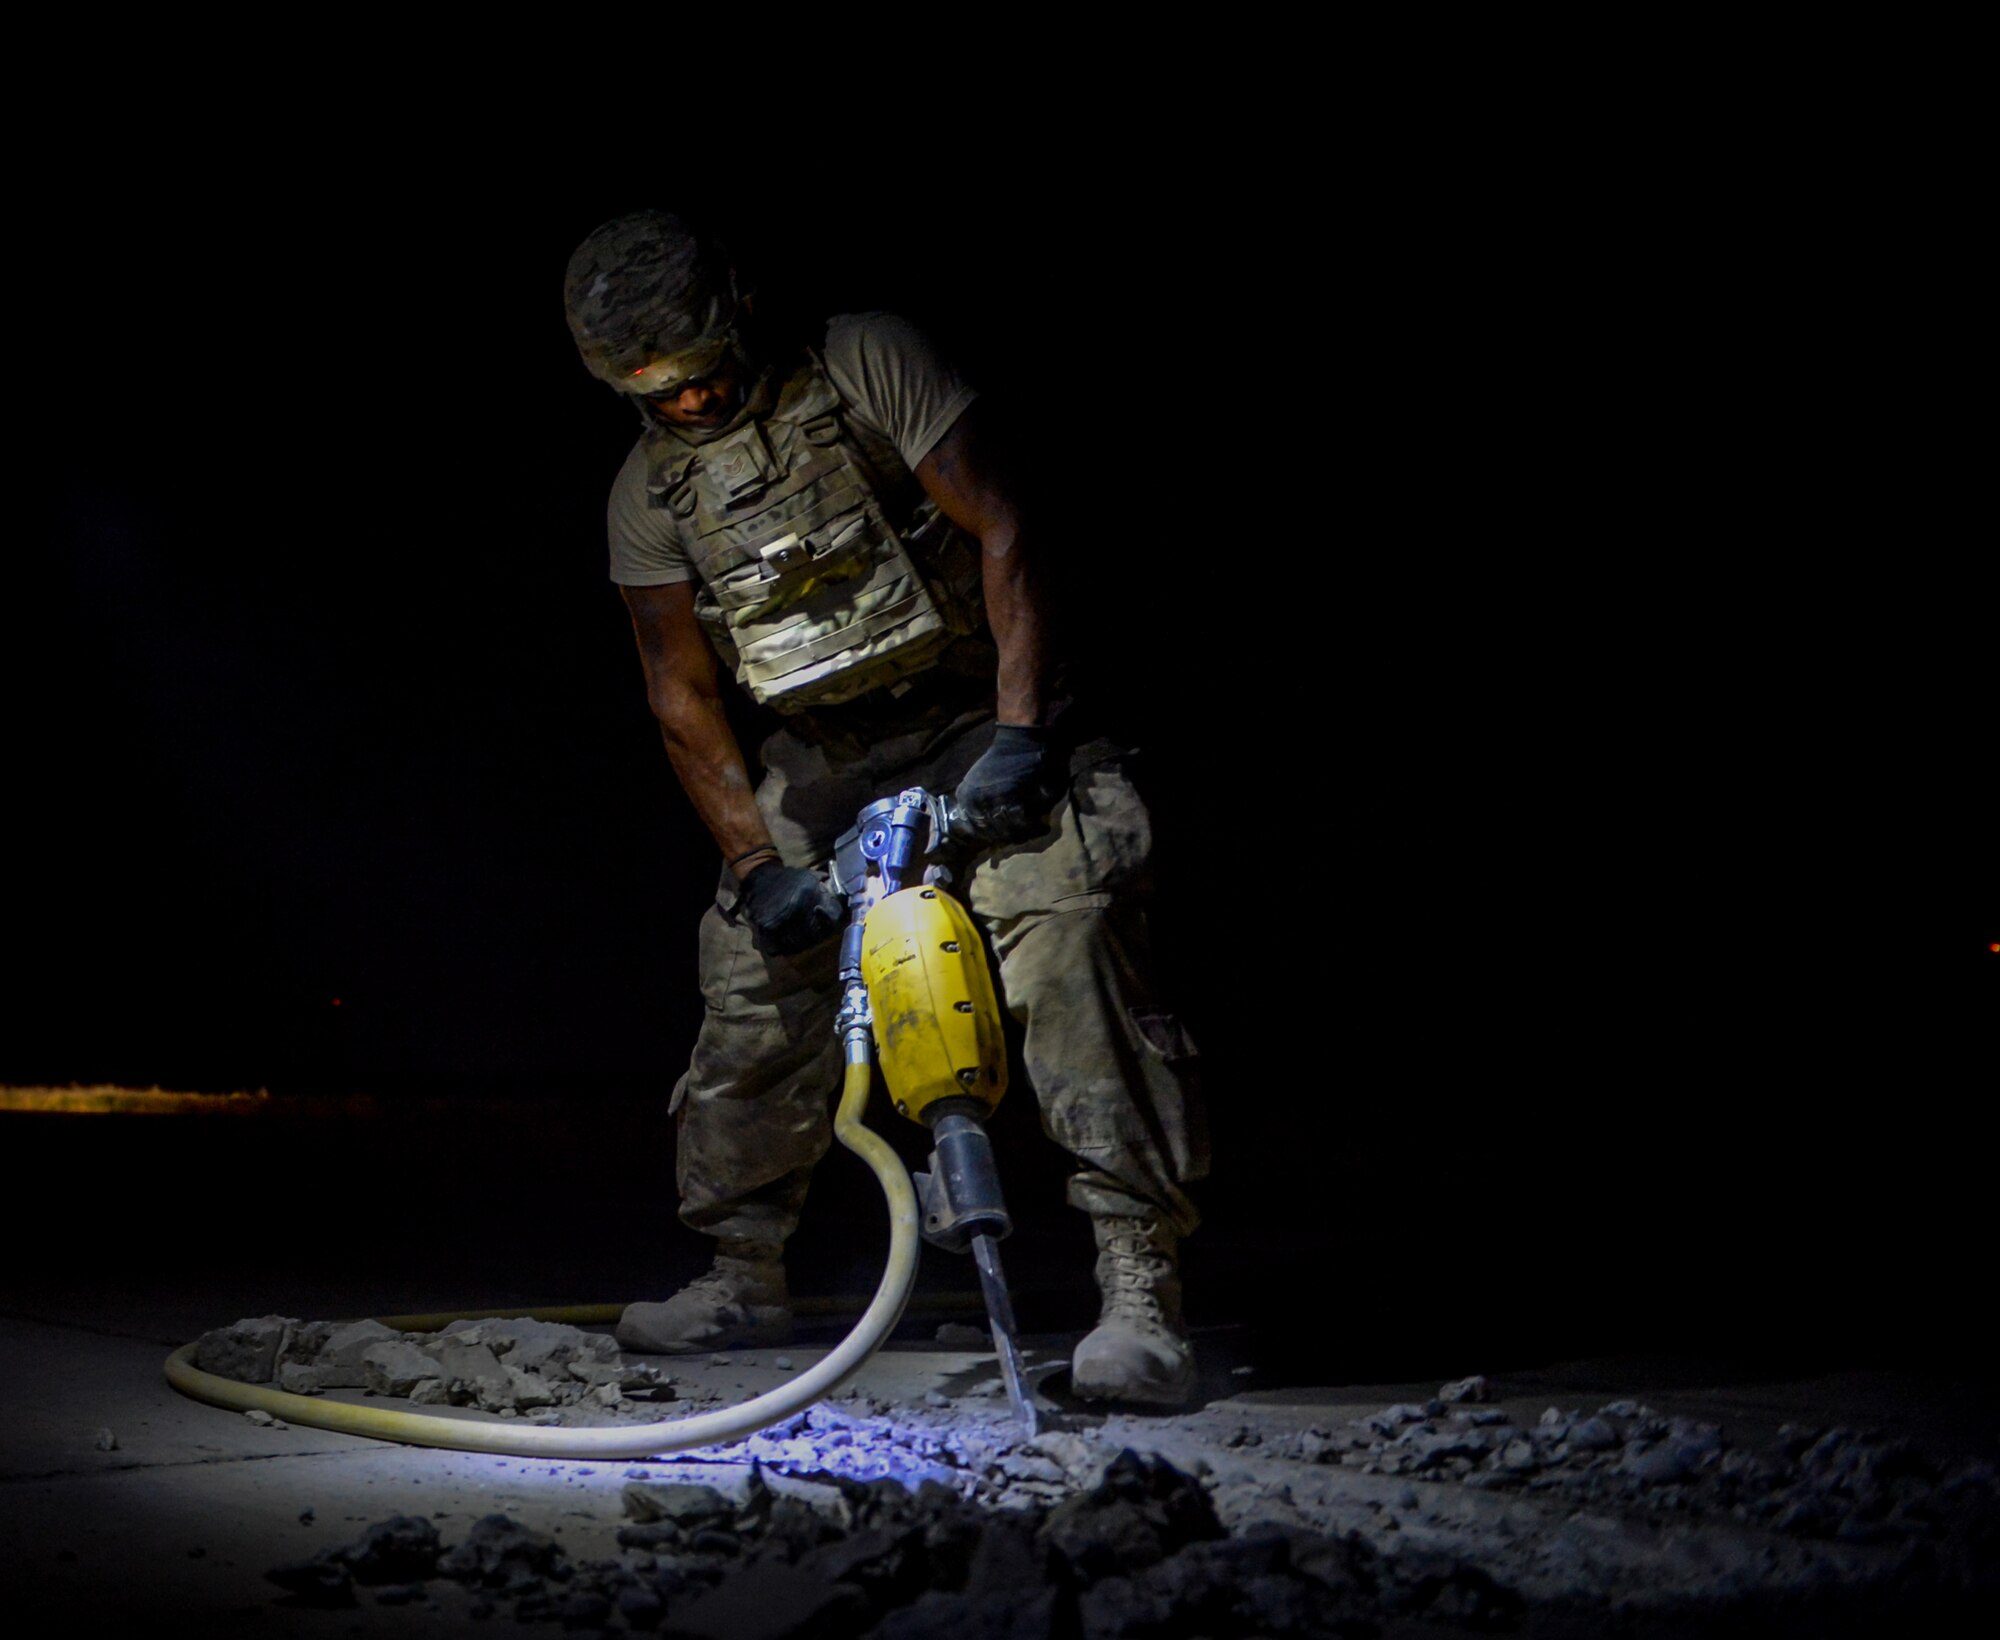 A member of the 1st Expeditionary Civil Engineer Group jackhammers a damaged section of the flightline at Qayyarah West Airfield during a restoration project May 16, 2017. Qayyarah West is an airfield in northern Iraq’s Ninawa Province and serves as the logistical hub and strategic launching pad resupplying the frontlines in an attempt to recapture Mosul. (U.S. Air Force photo by Staff Sgt. Michael Battles)